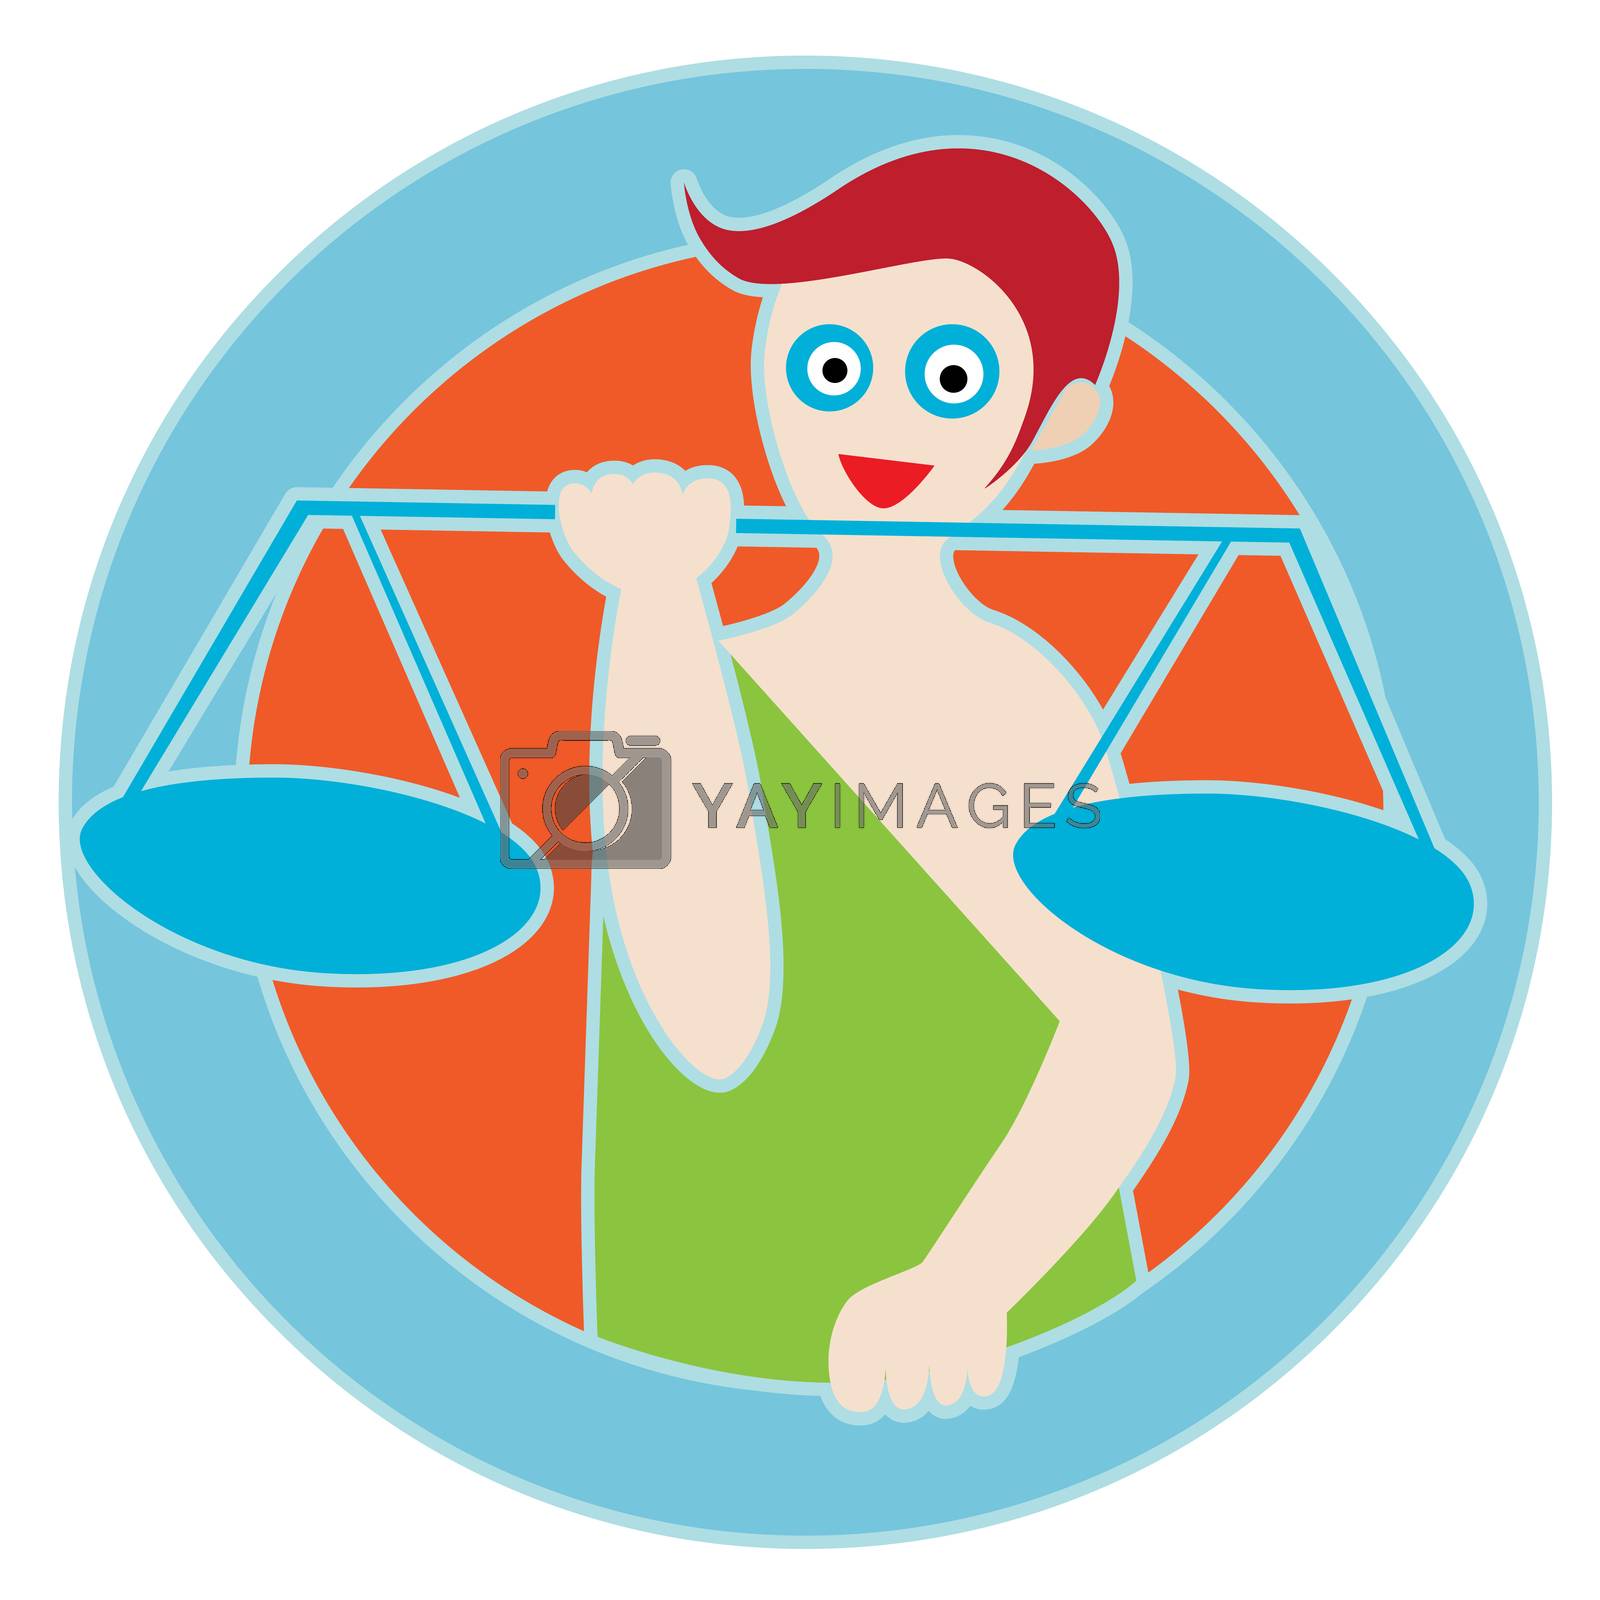 Royalty free image of clip art libra by catacos